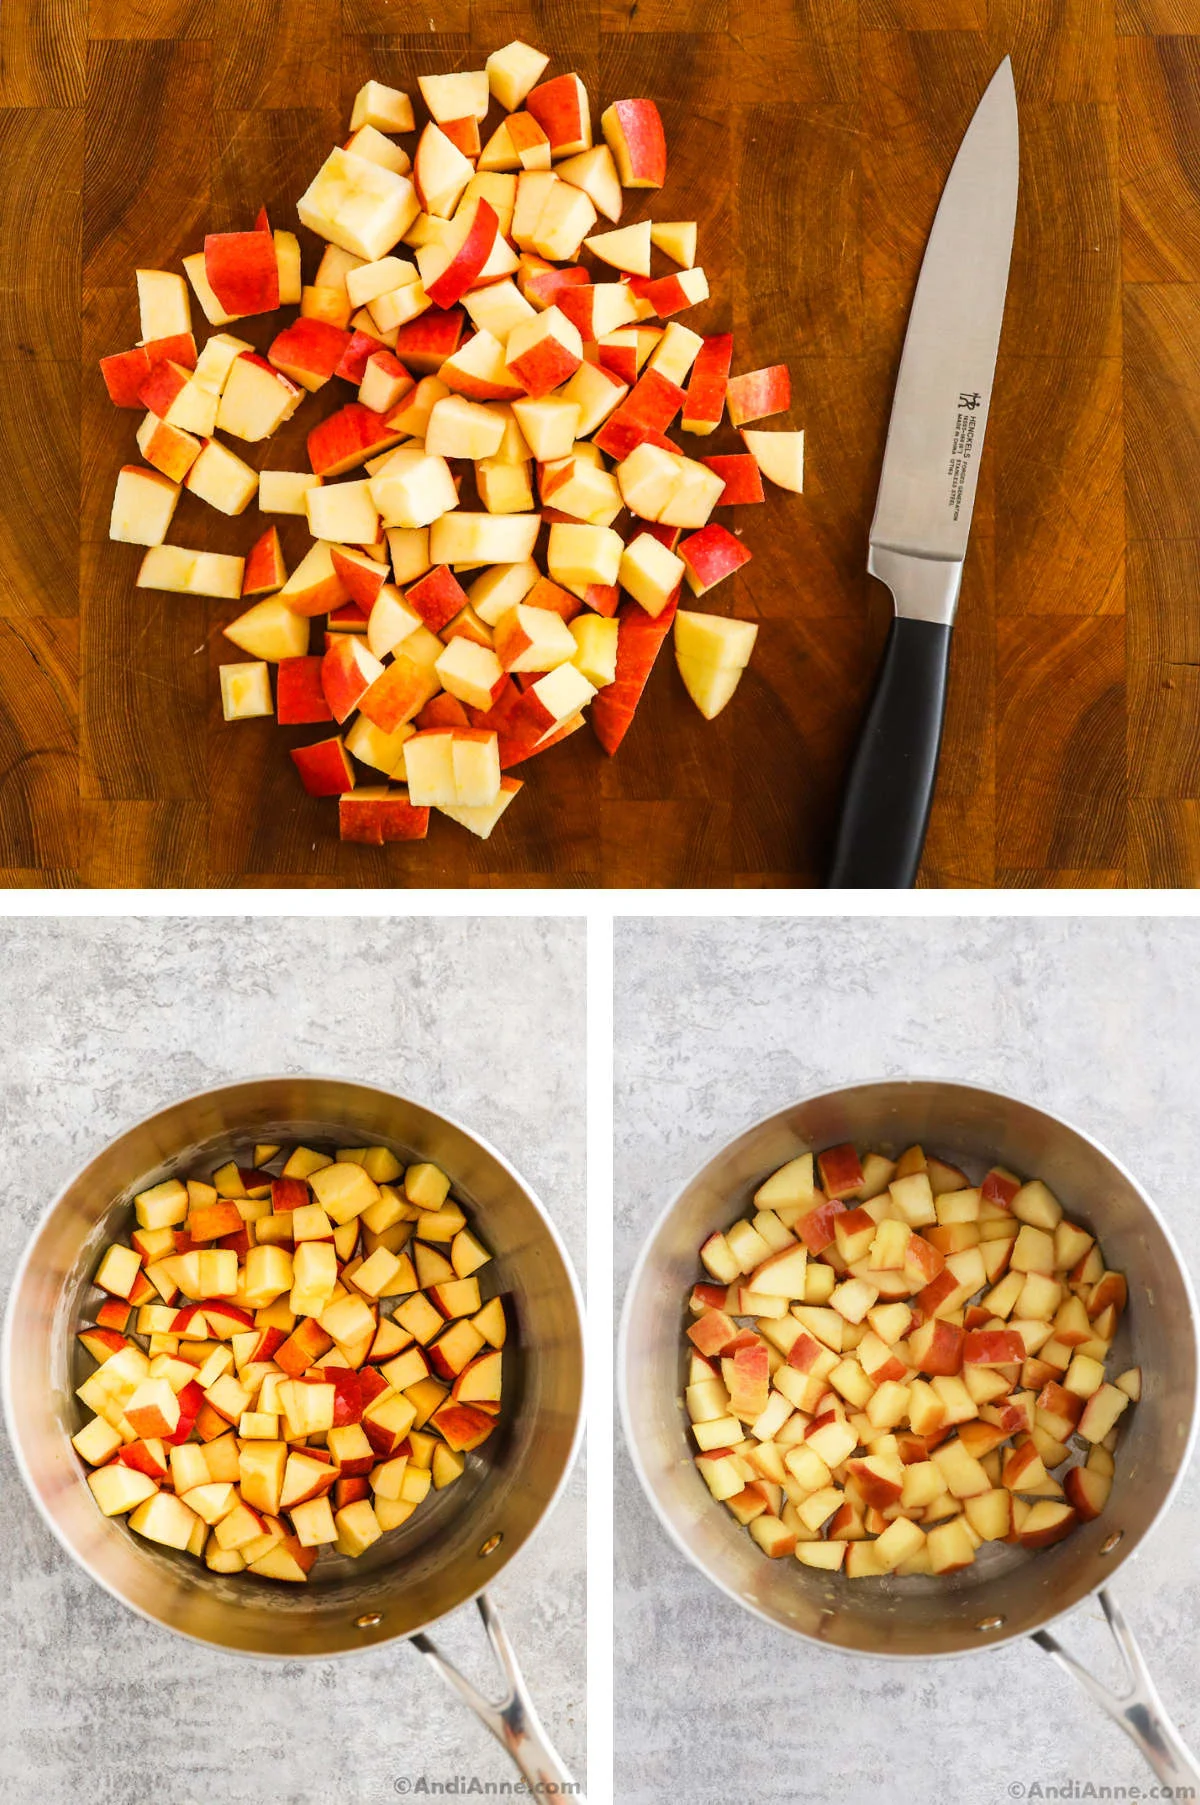 Three overhead images in one: 1. Chopped apples on a wooden cutting board with a knife to the side. 2. Chopped apples in a steel pot. 3. Sauteed chopped apples in a steel pot. 